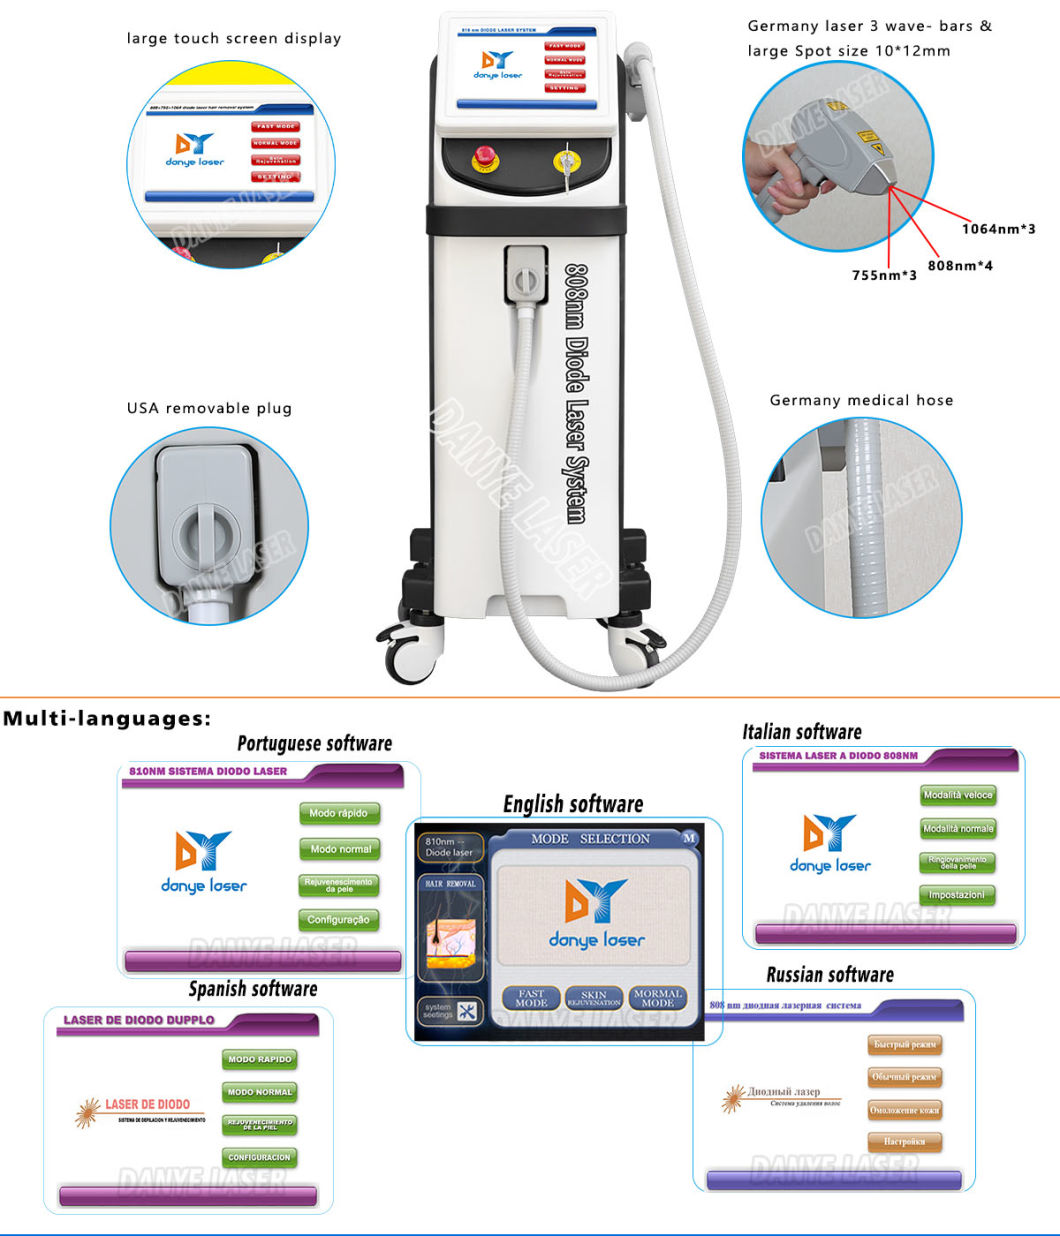 Danye 808nm 755nm 1064nm Laser Diode Laser Hair Removal Machine for All Skin Types with Competitive Price